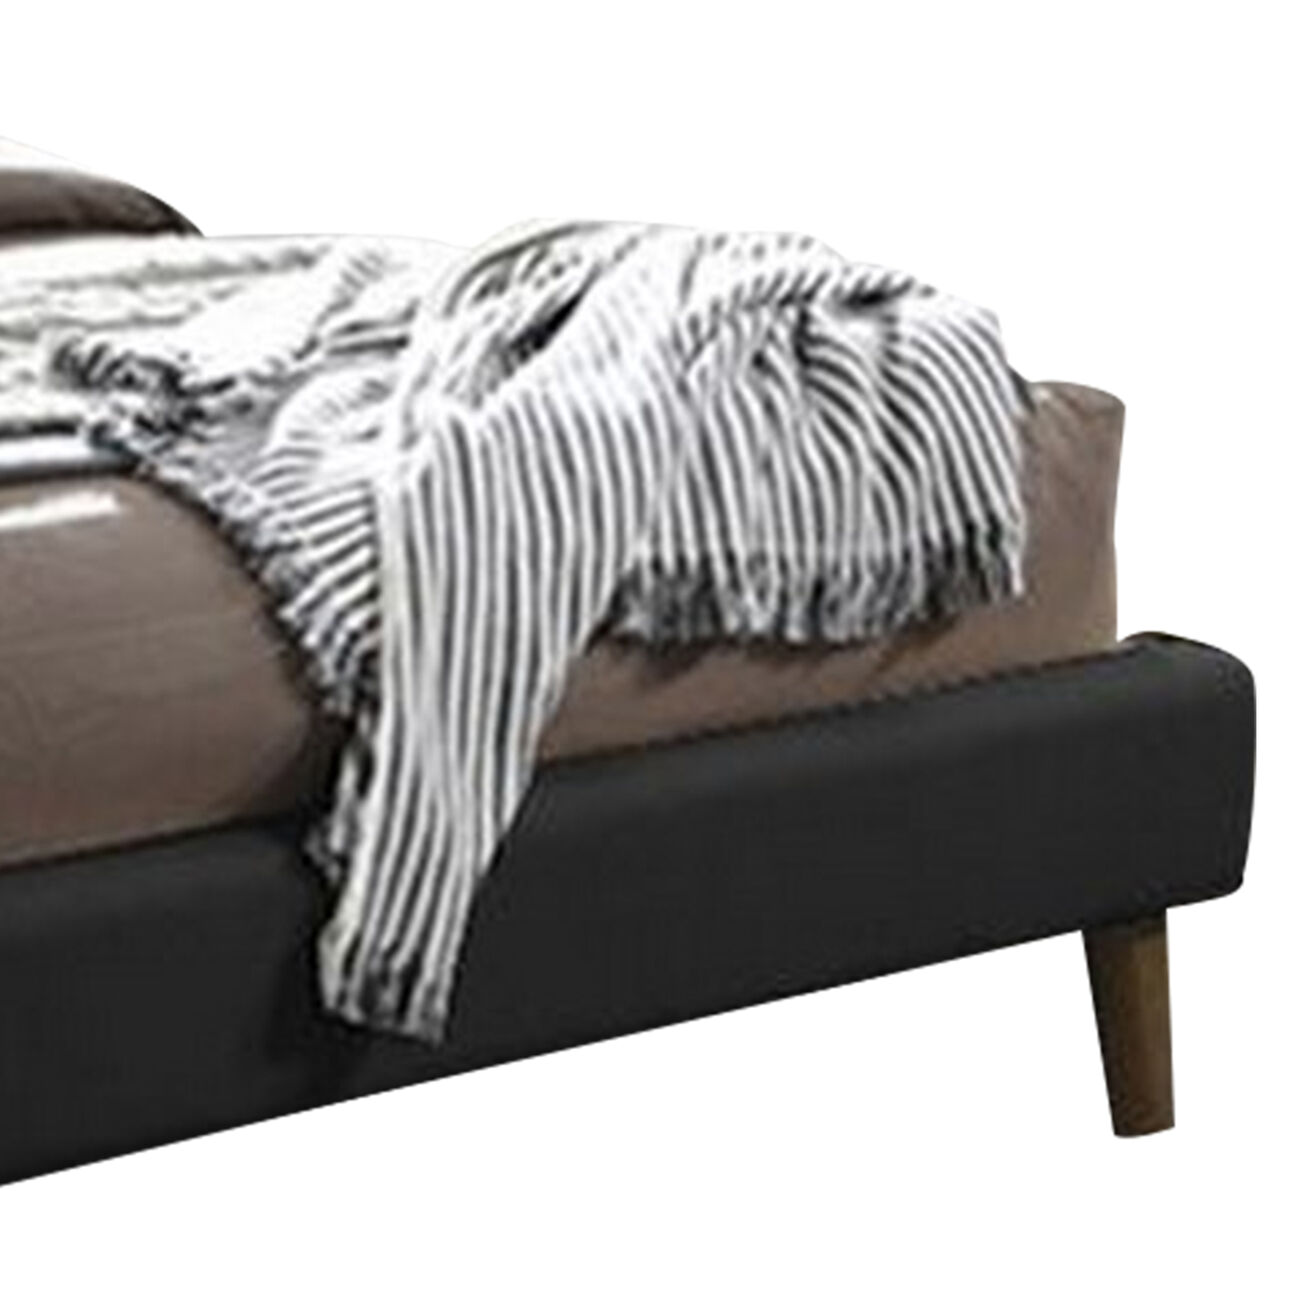 Square Tufting Fabric King Bed with Angled Wooden Legs, Dark Gray - BM229100